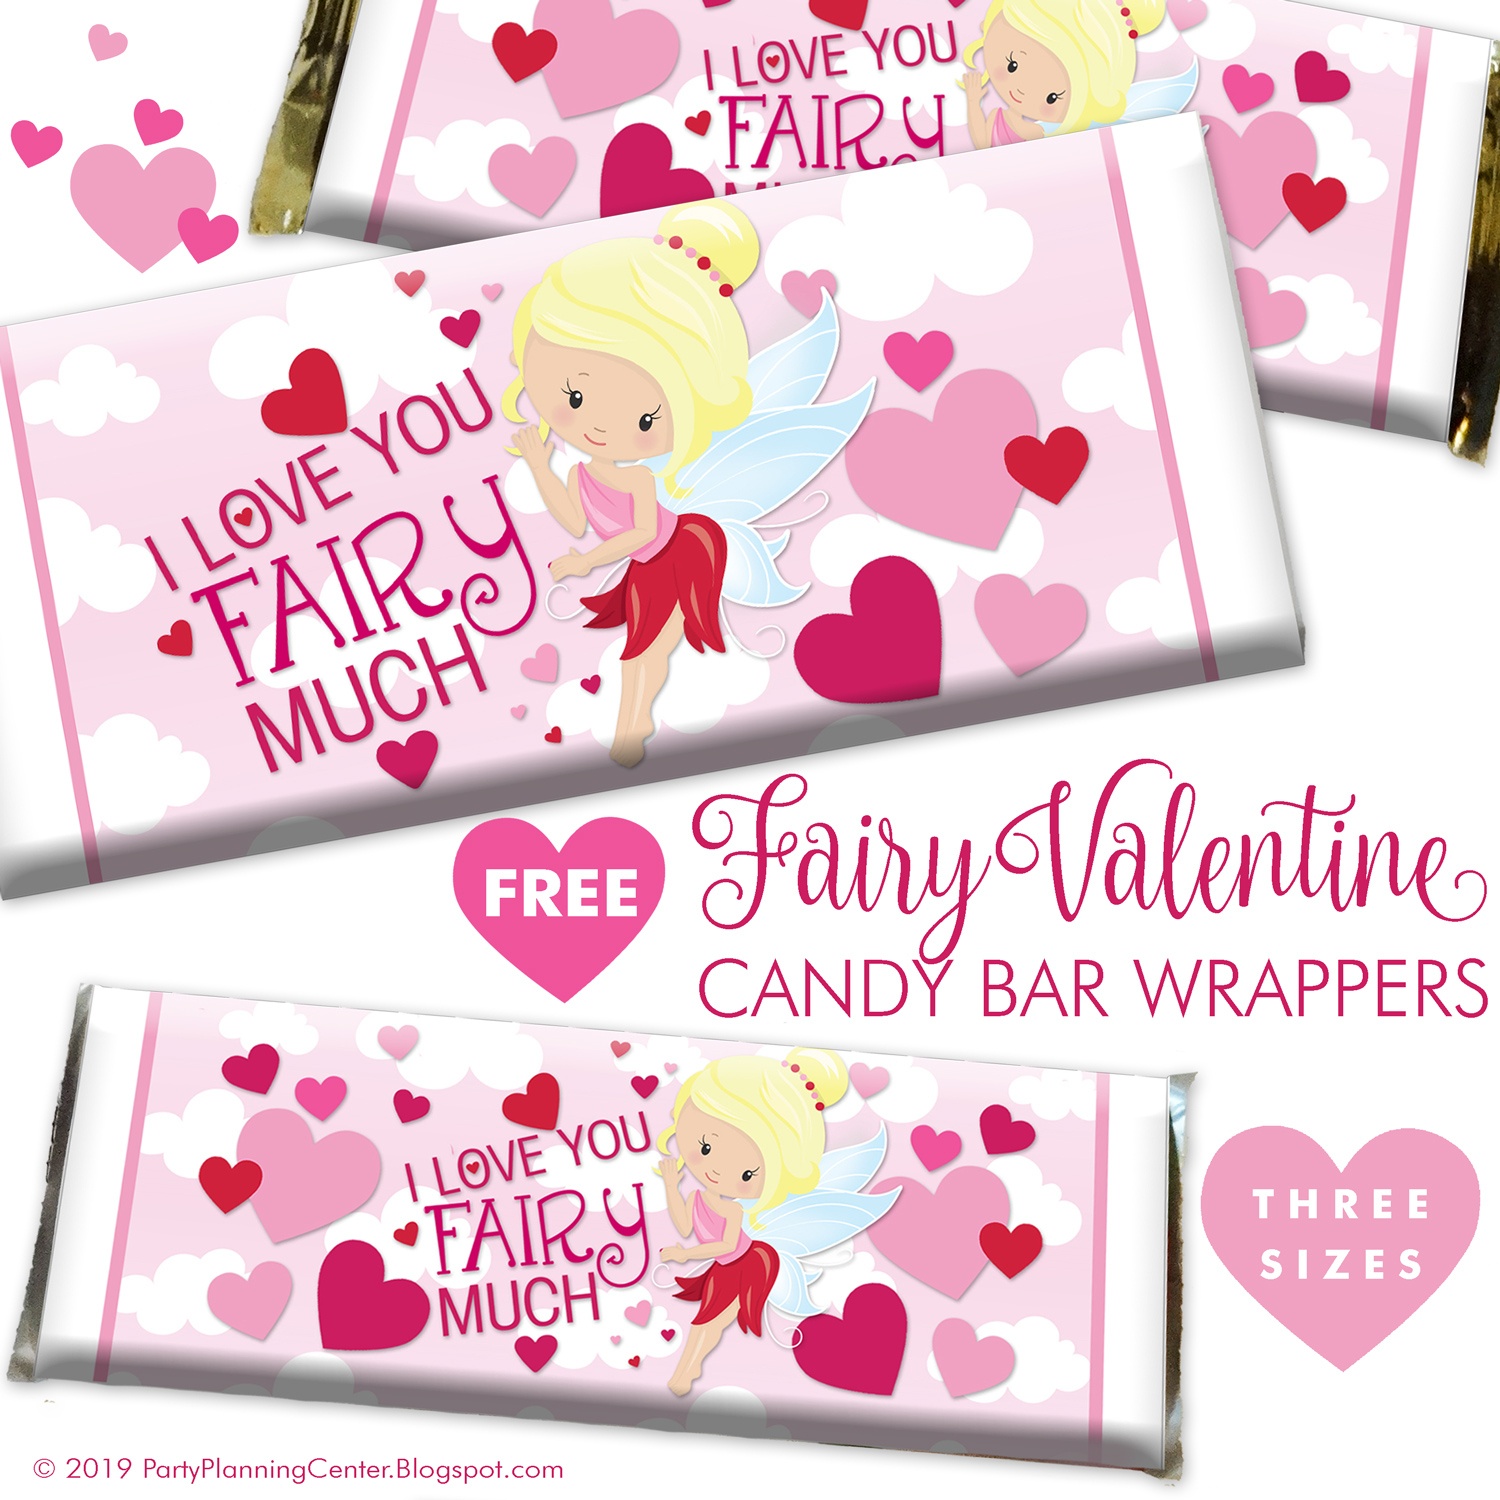 Can&amp;#039;t Find Substitution For Tag [Post.body]--&amp;gt; Free Fairy Hershey - Free Printable Candy Bar Wrappers